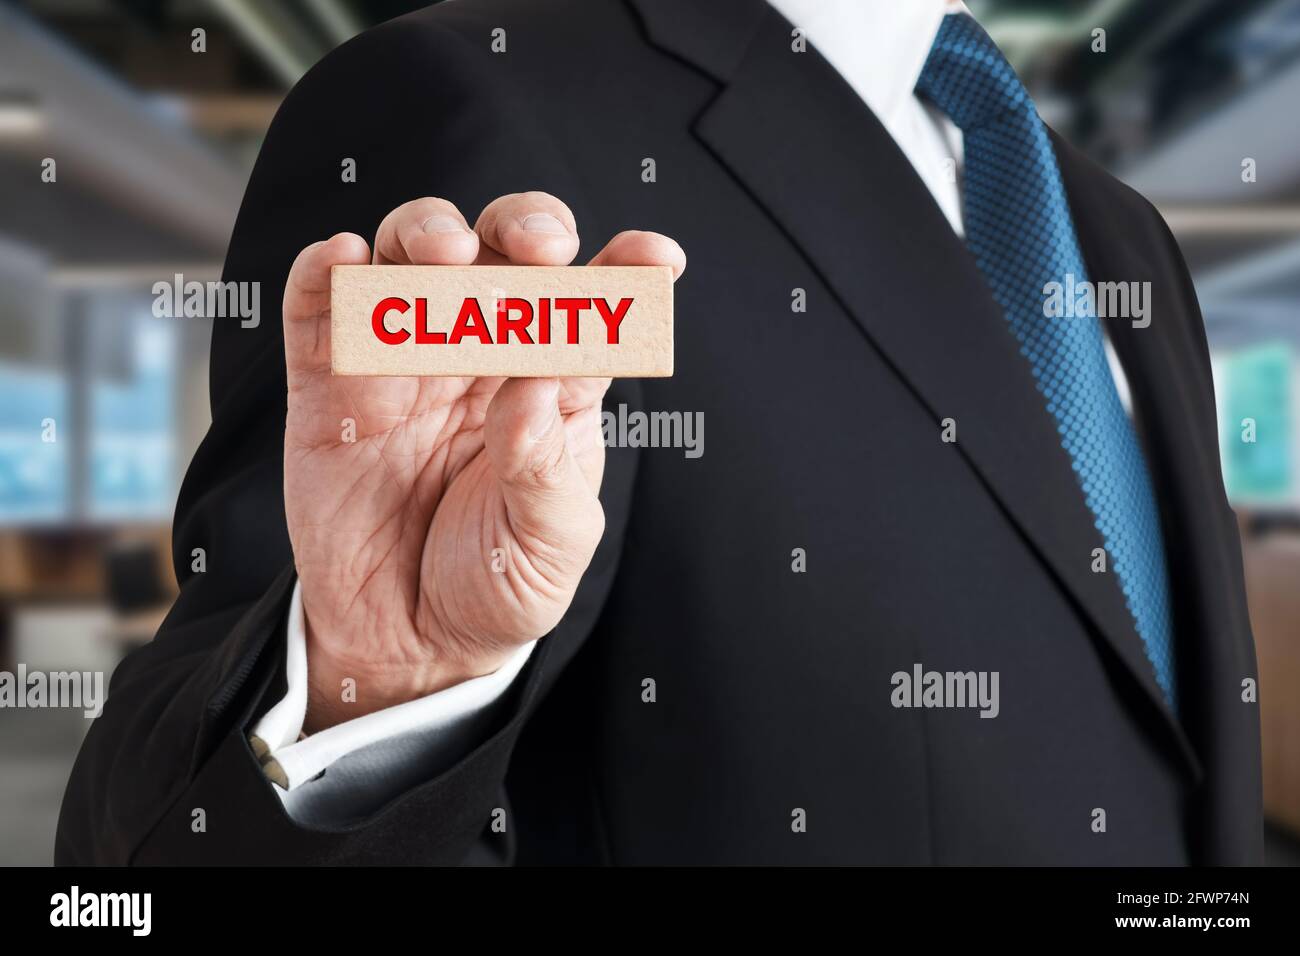 Businessman shows a wooden block with the word clarity. Transparency, simplification and clarity in business management concept. Stock Photo